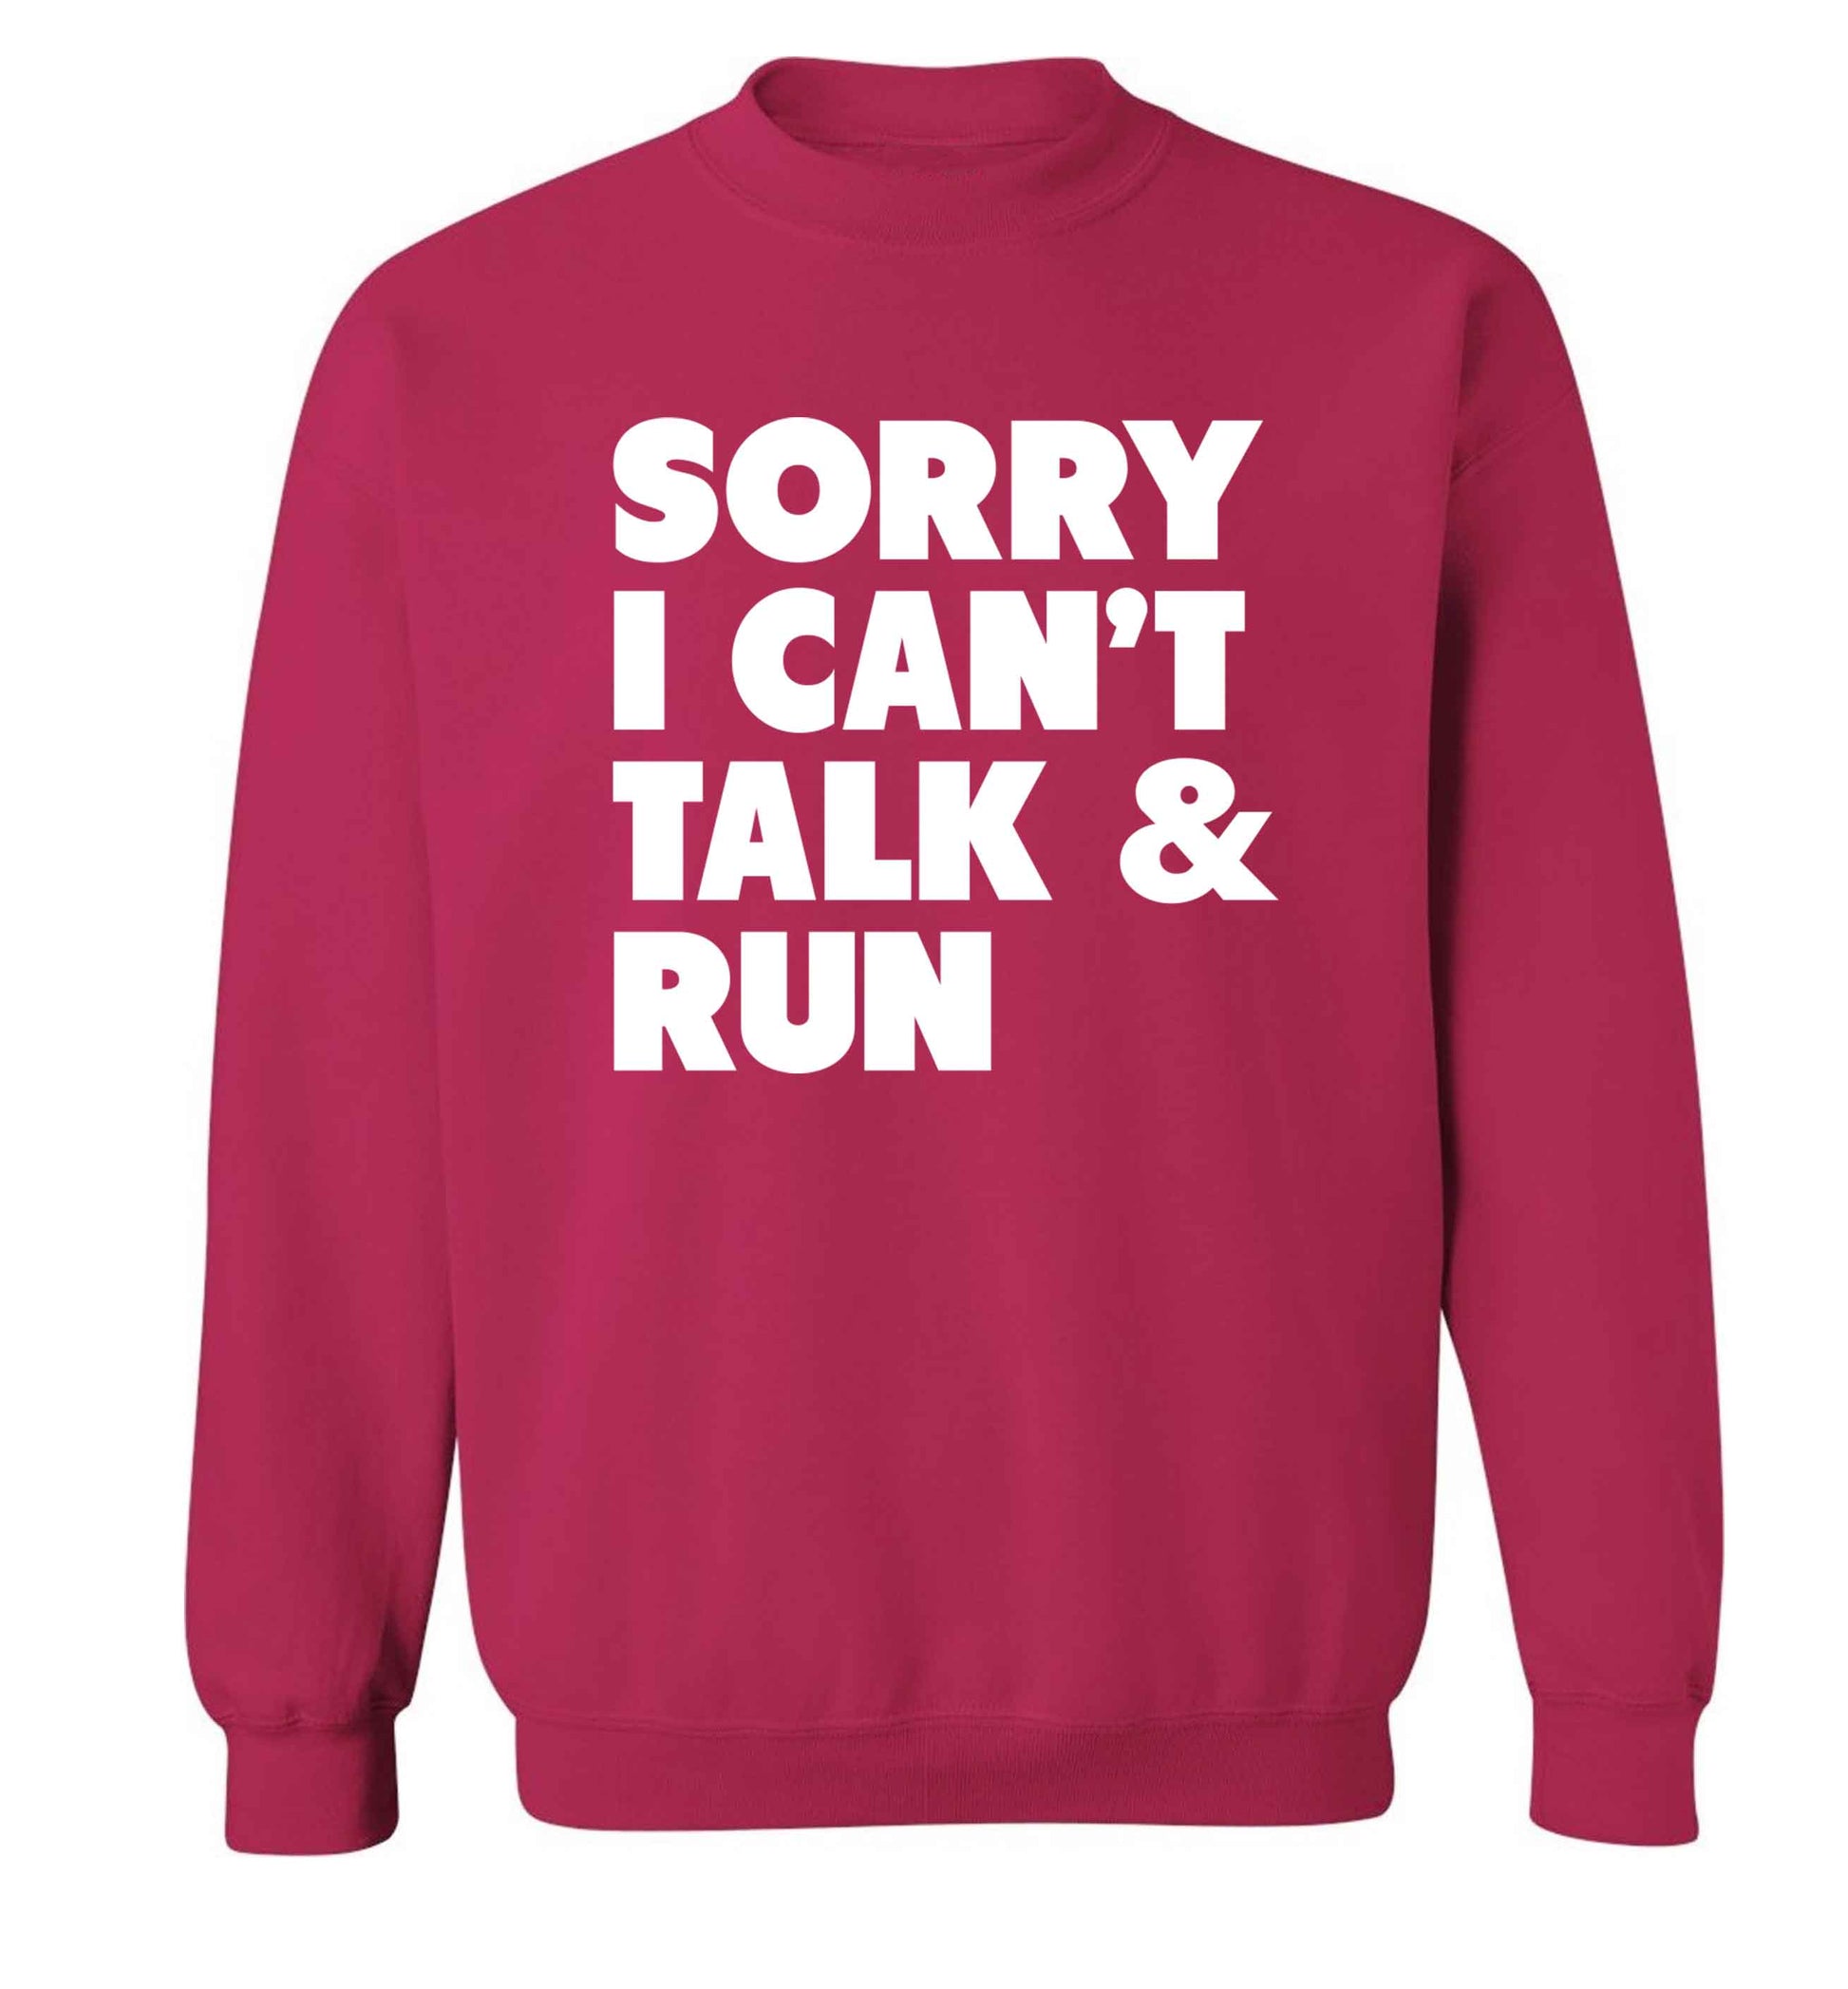 Sorry I can't talk and run adult's unisex pink sweater 2XL